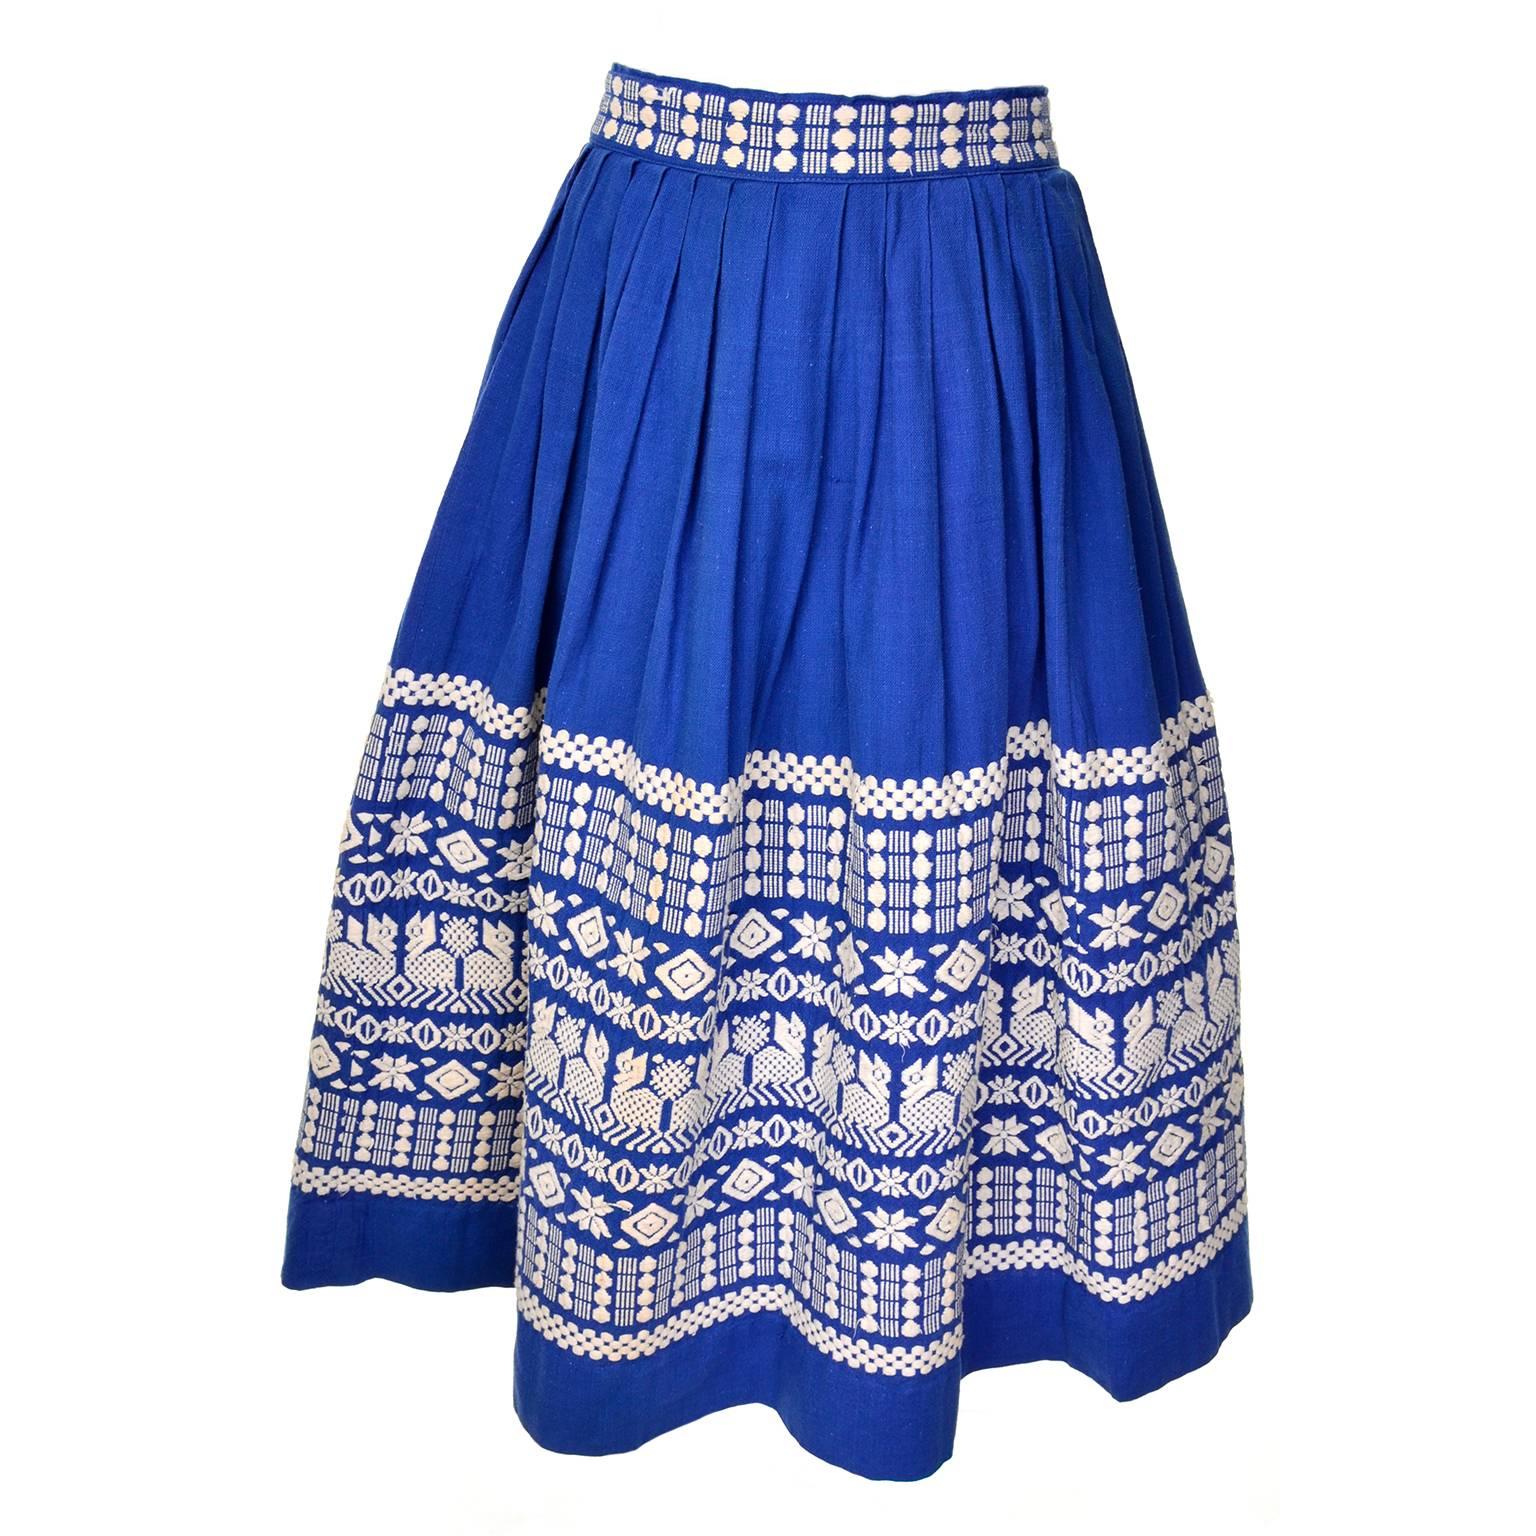 1950s Pelux Guatemala Vintage Folk Blue Skirt Handwoven with White Embroidery For Sale